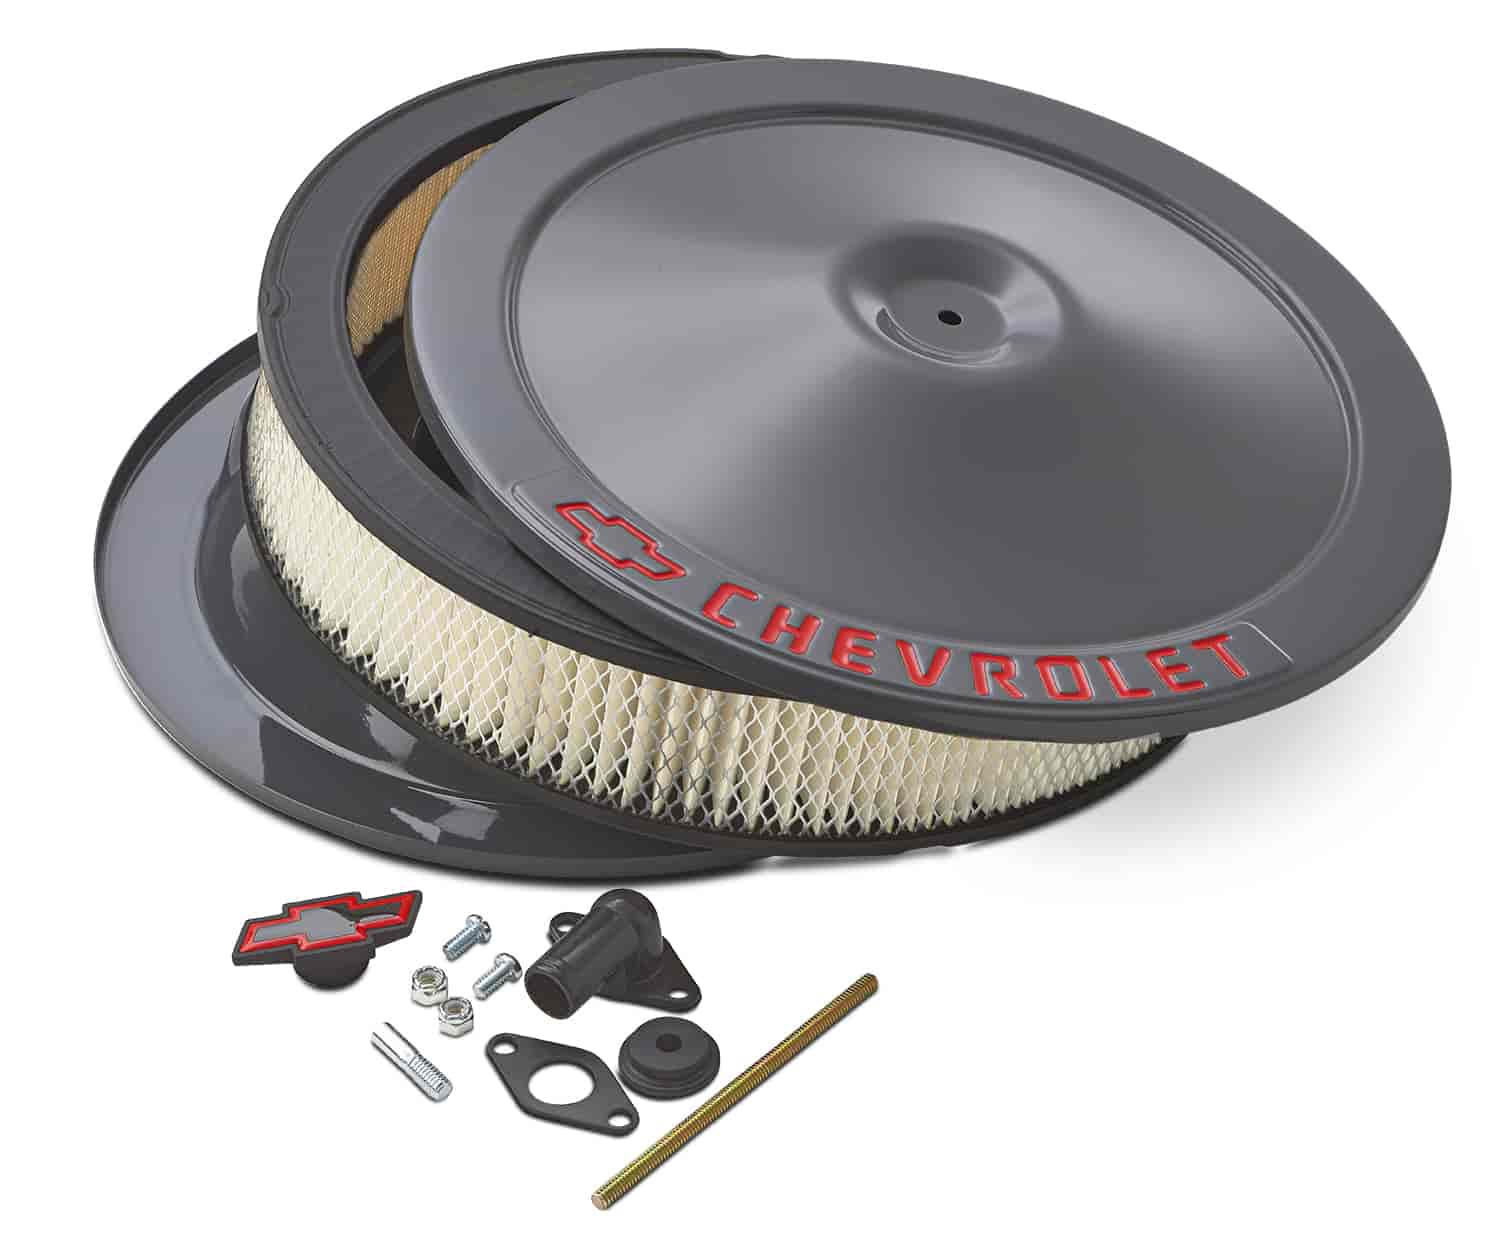 Proform Classic Chevrolet 14 in x 3 in. Air Cleaner Kit with Bowtie & Chevrolet Emblem in Shark Gray Finish